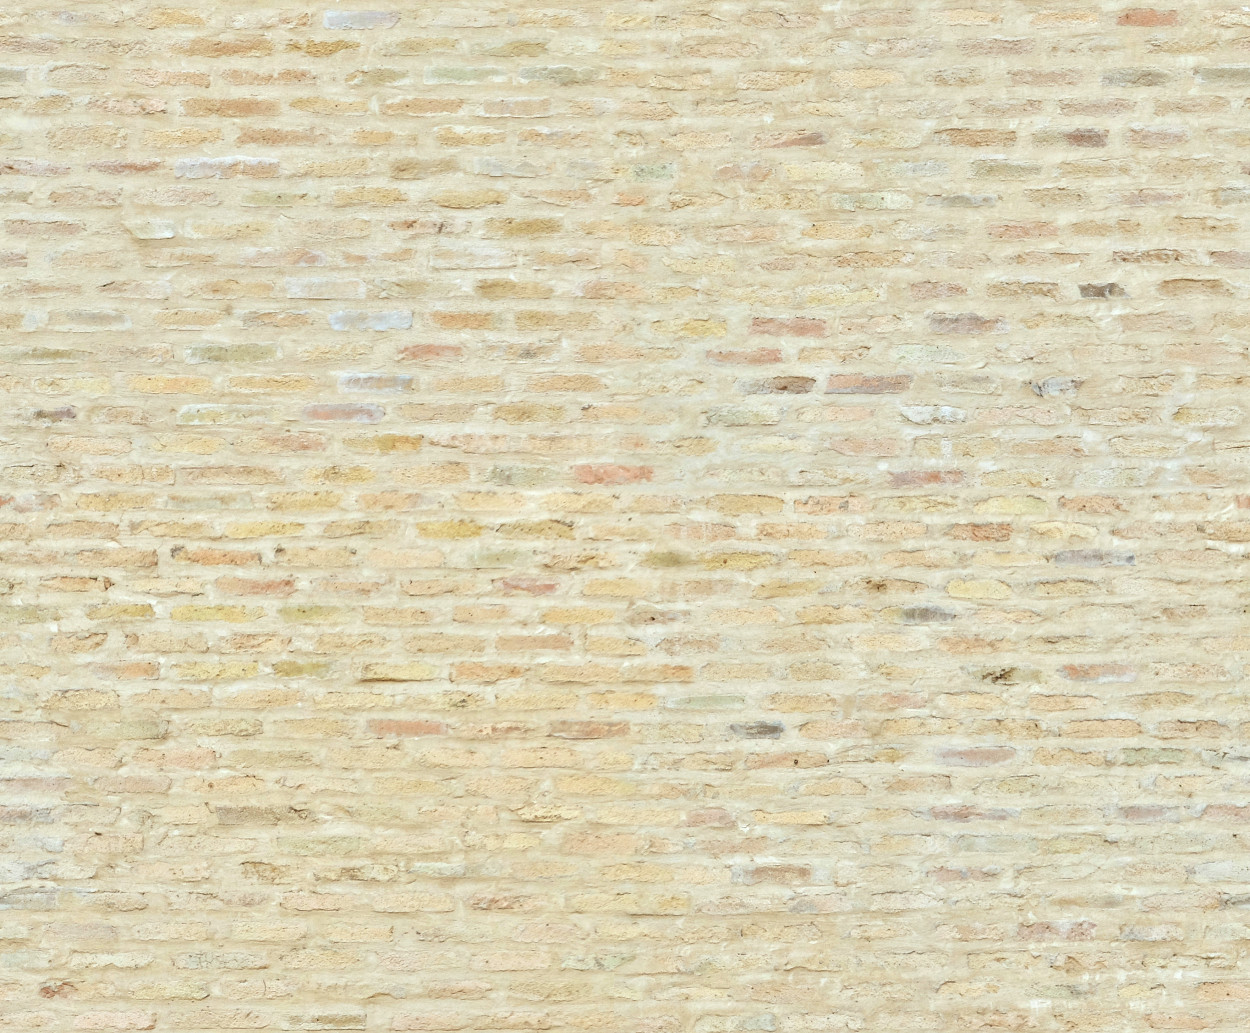 A seamless buff bricks texture for use in architectural drawings and 3D models